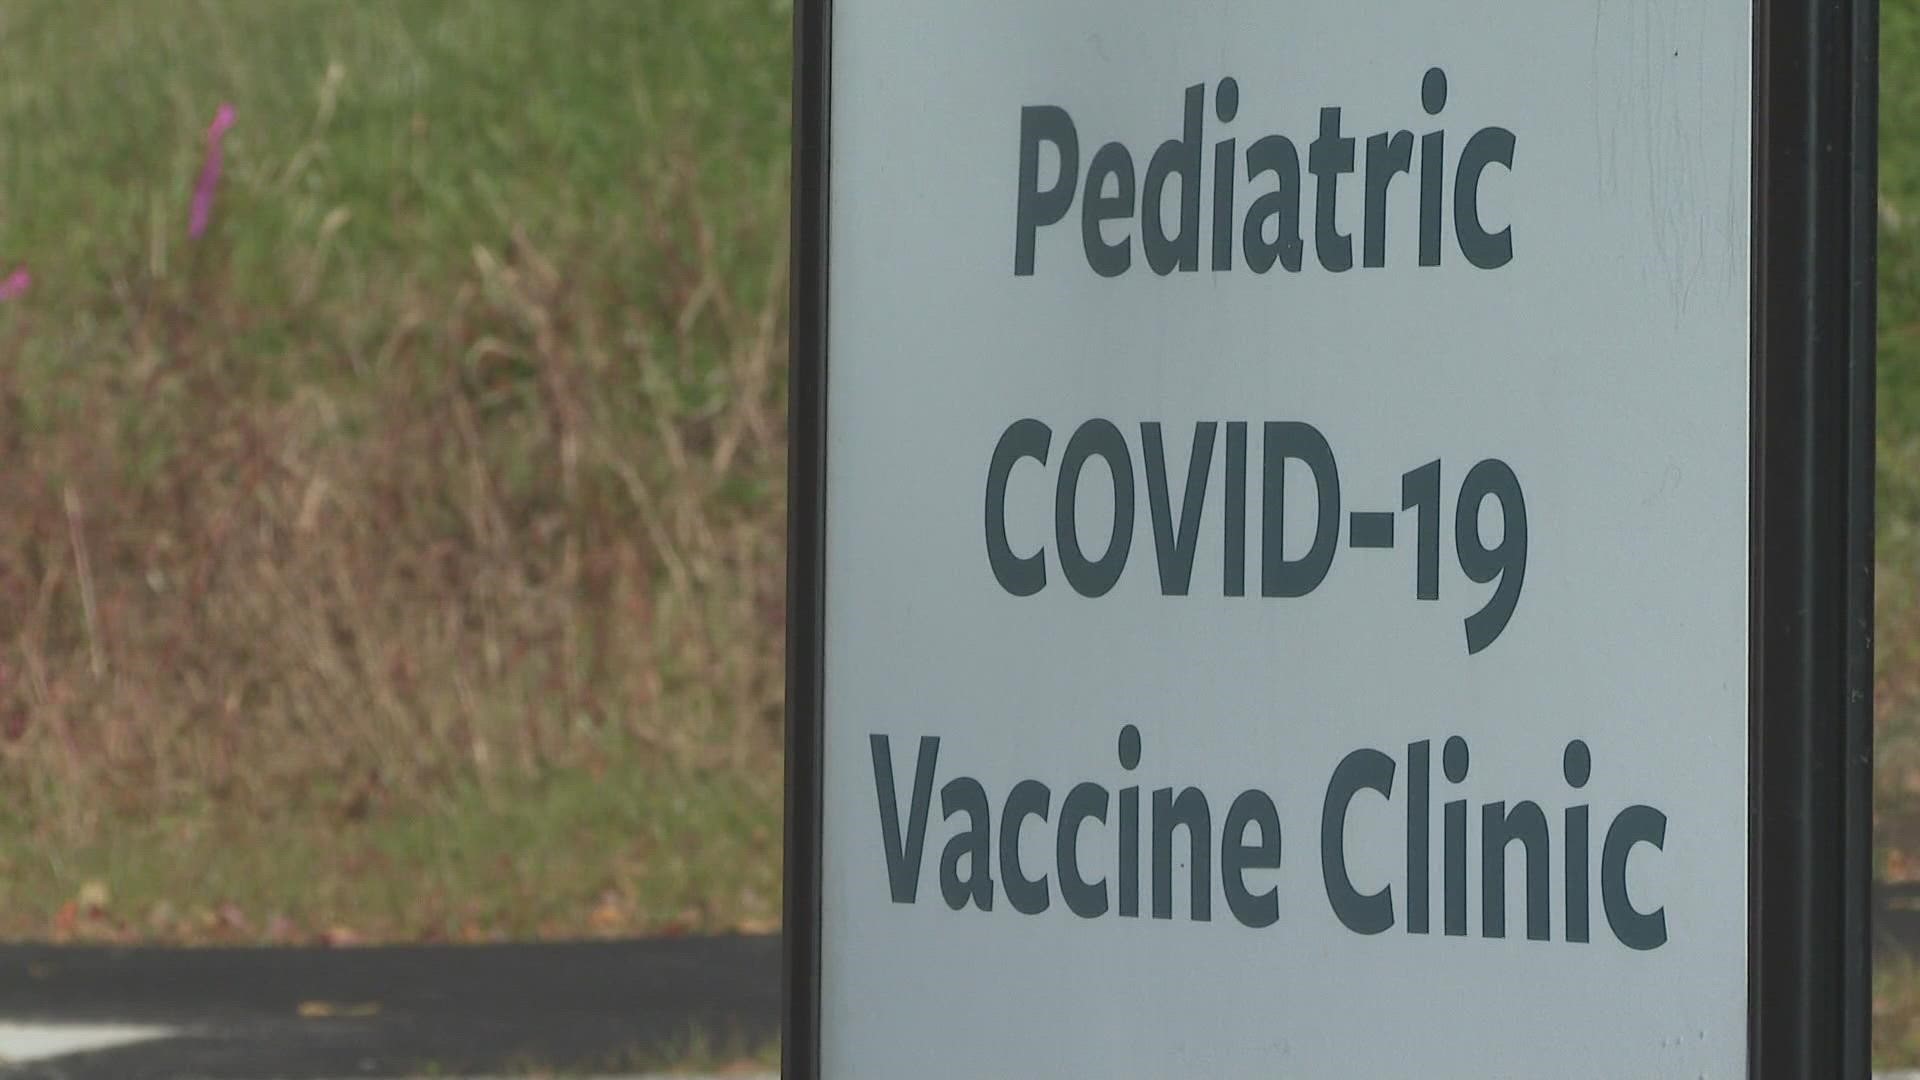 From 7 a.m. to 7 p.m. the Portland hospital welcomed children ages 5-11 for their first dose of the vaccine Saturday.